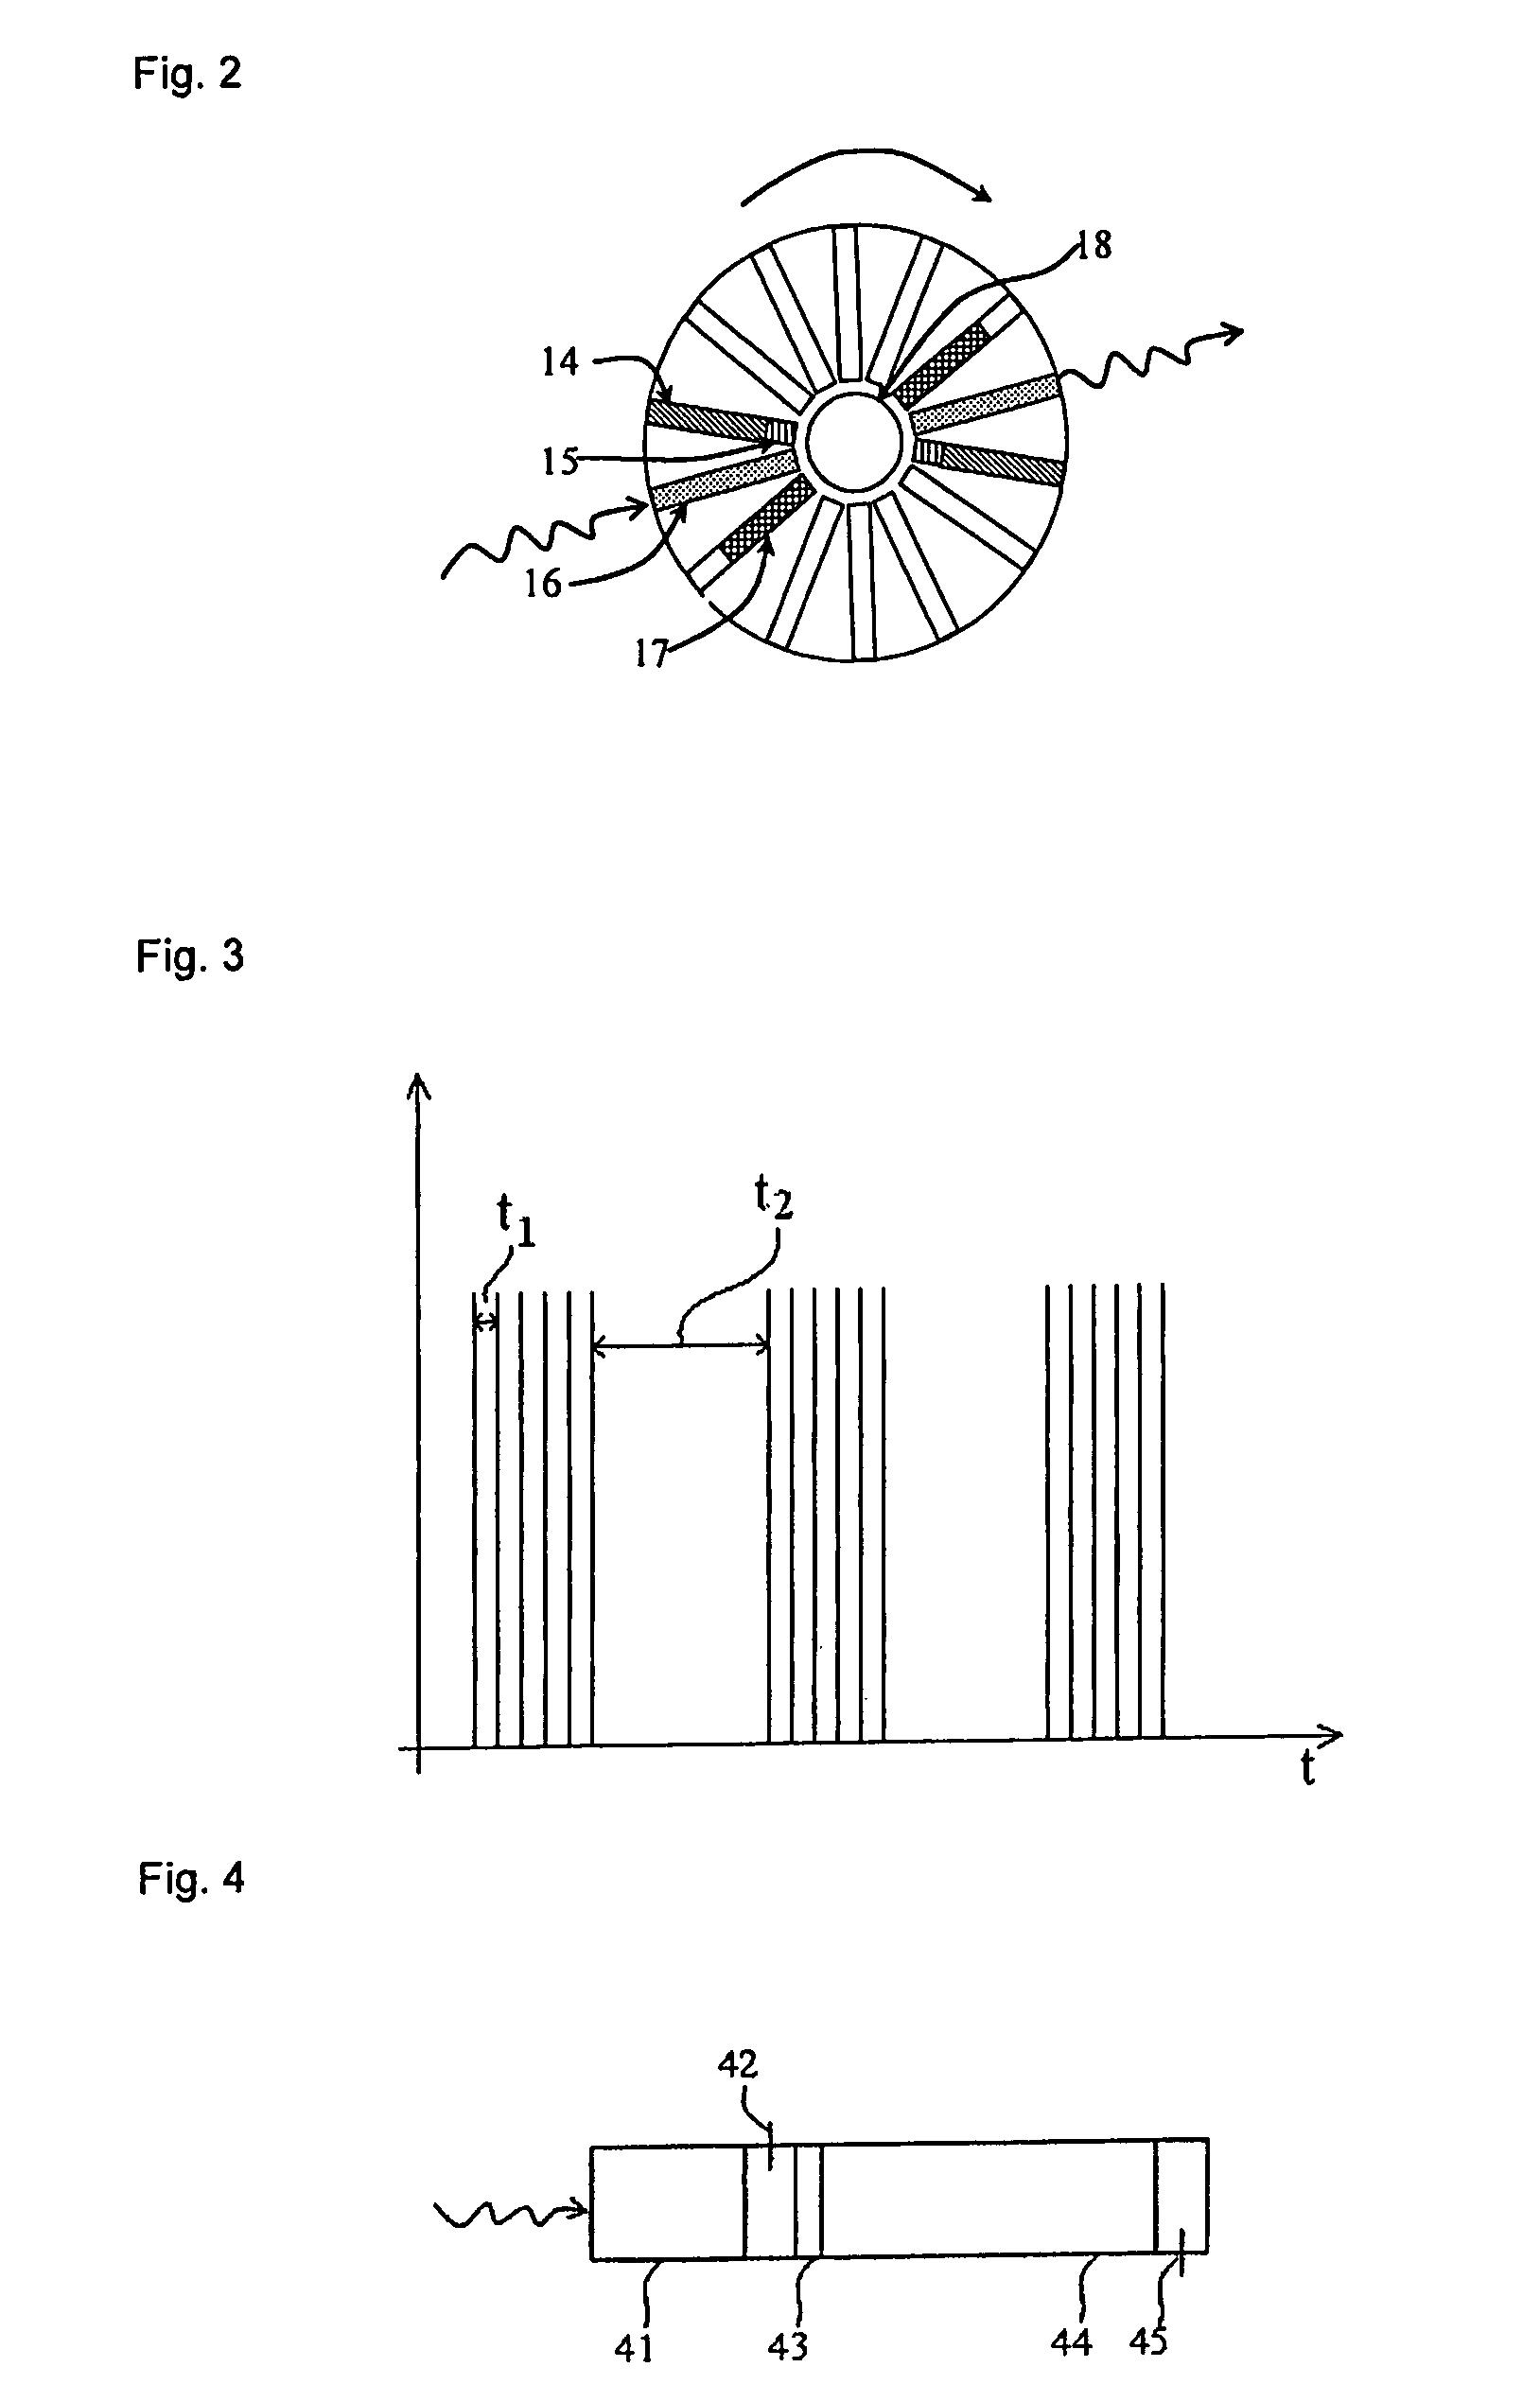 Method for inspecting object using multi-energy radiations and apparatus thereof